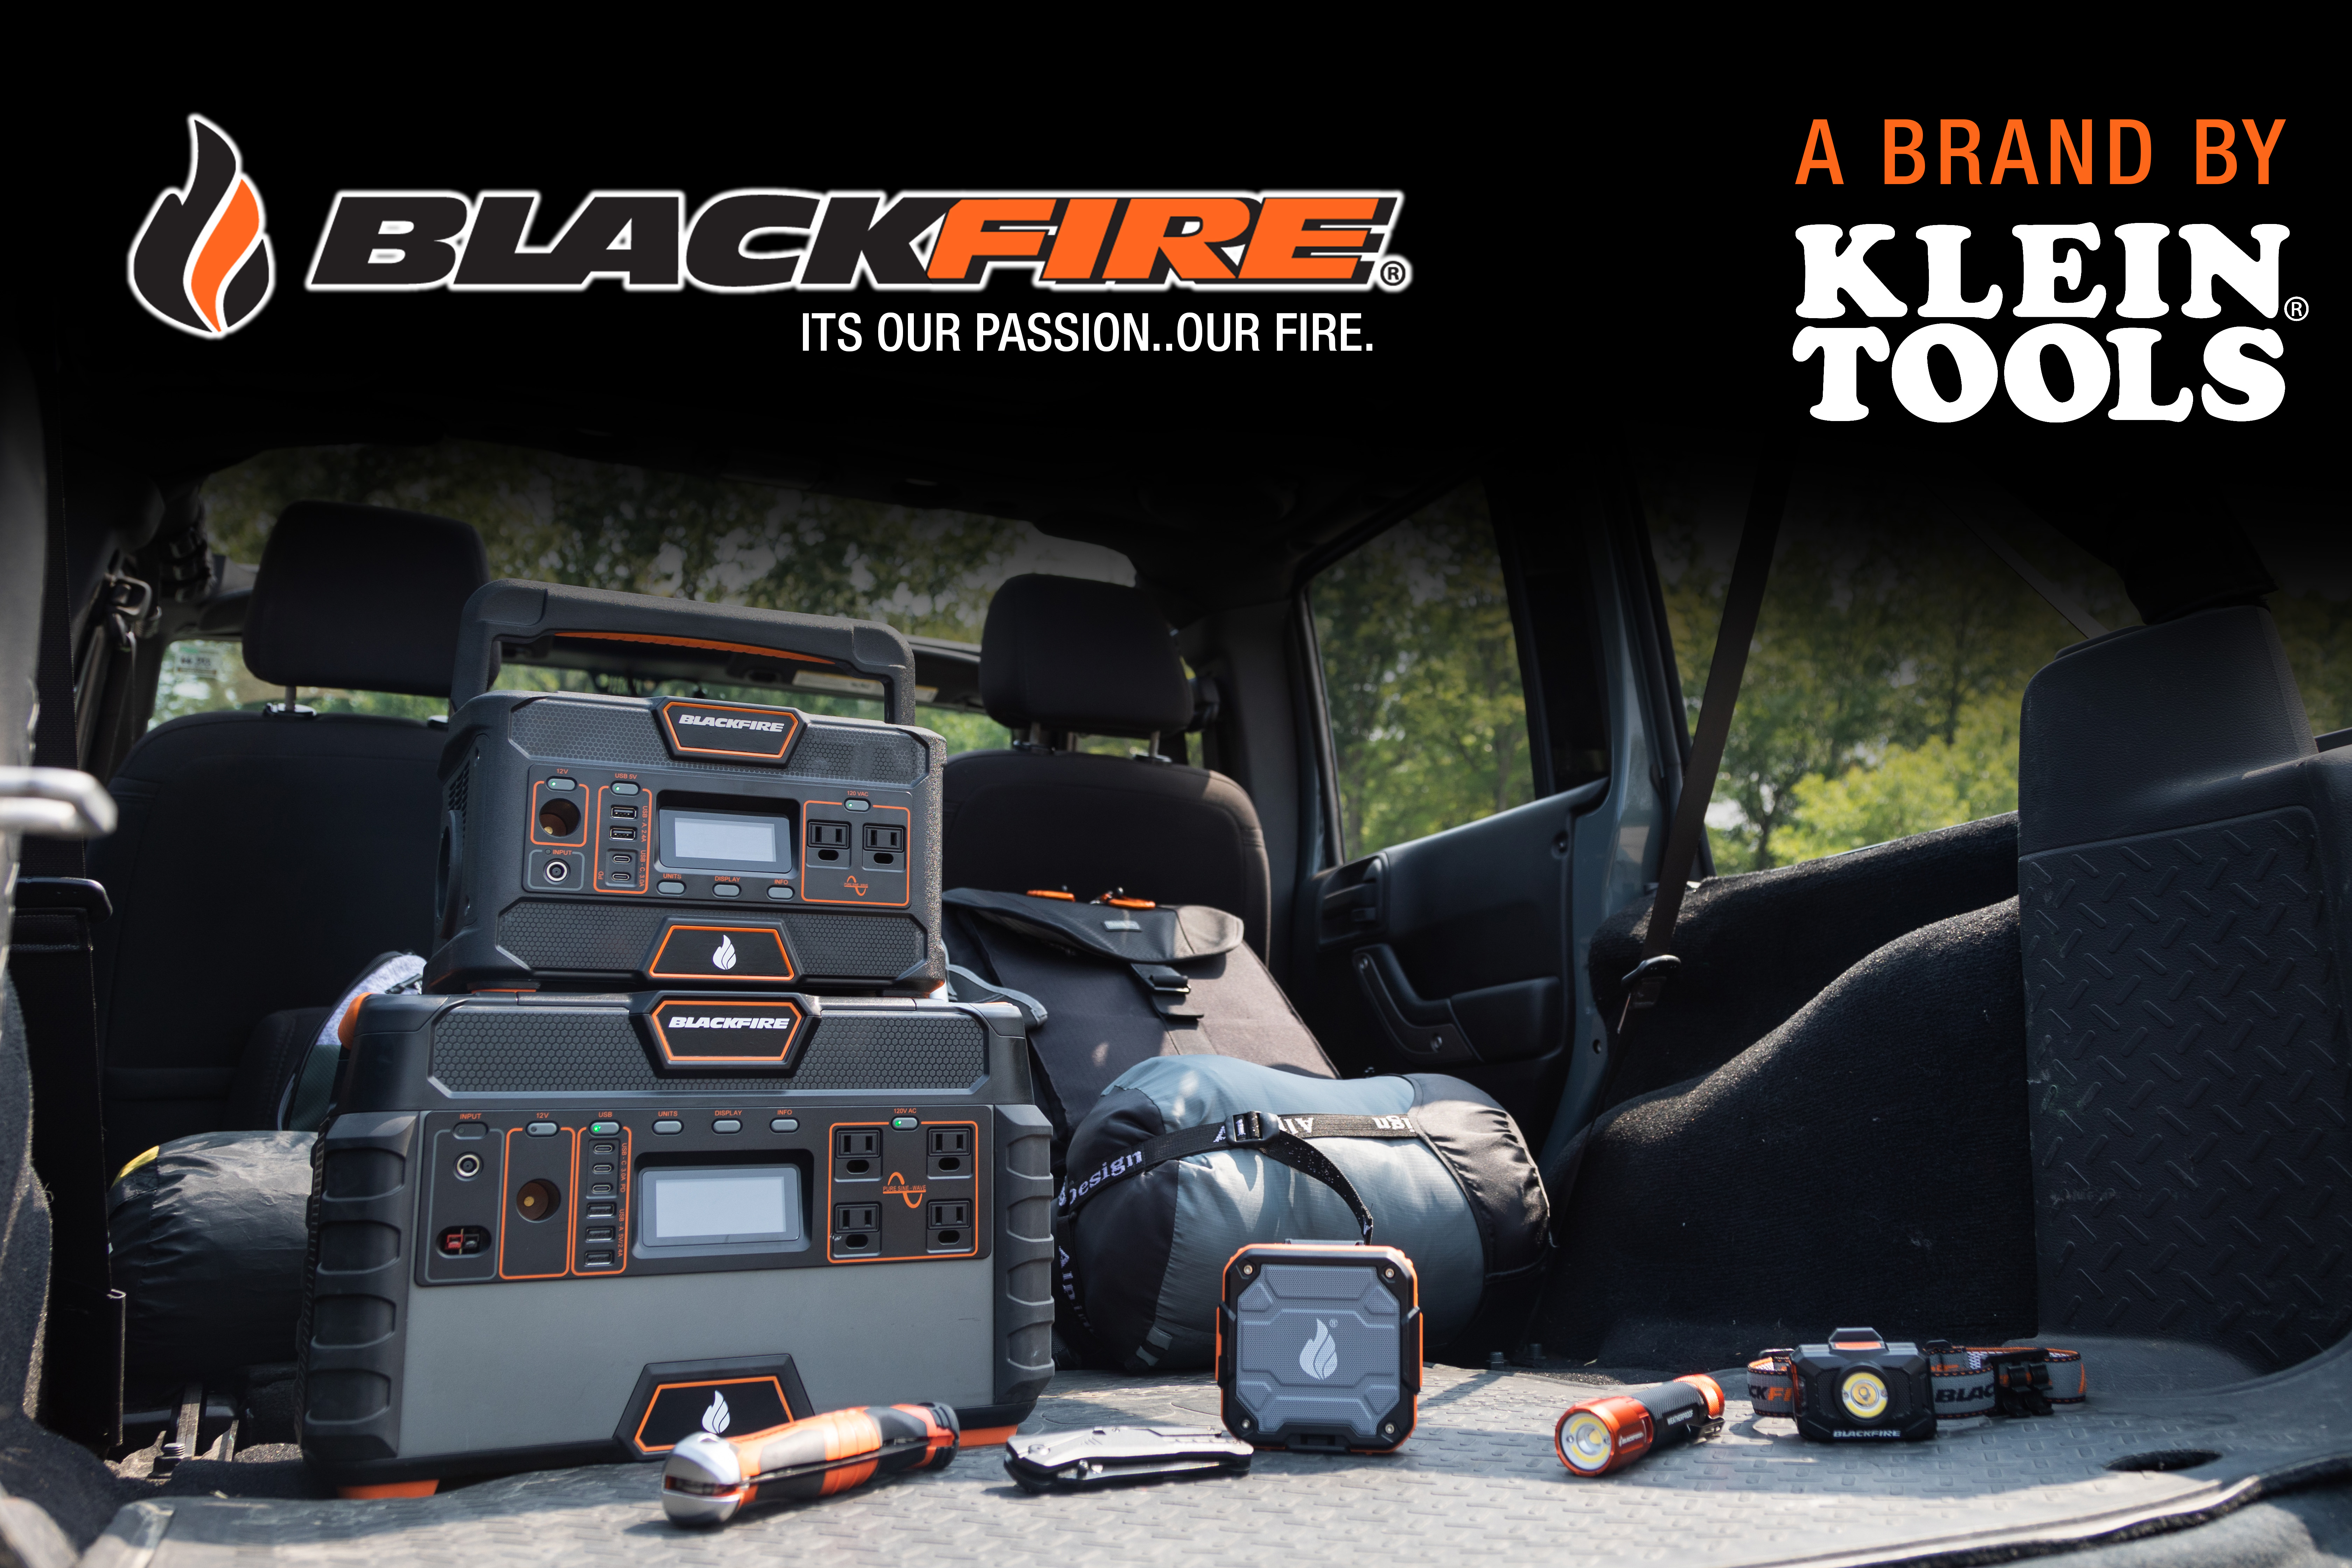 Blackfire, The Official Outdoor Gear Brand of Klein Tools, Introduces a New Breed of Outdoor Gear